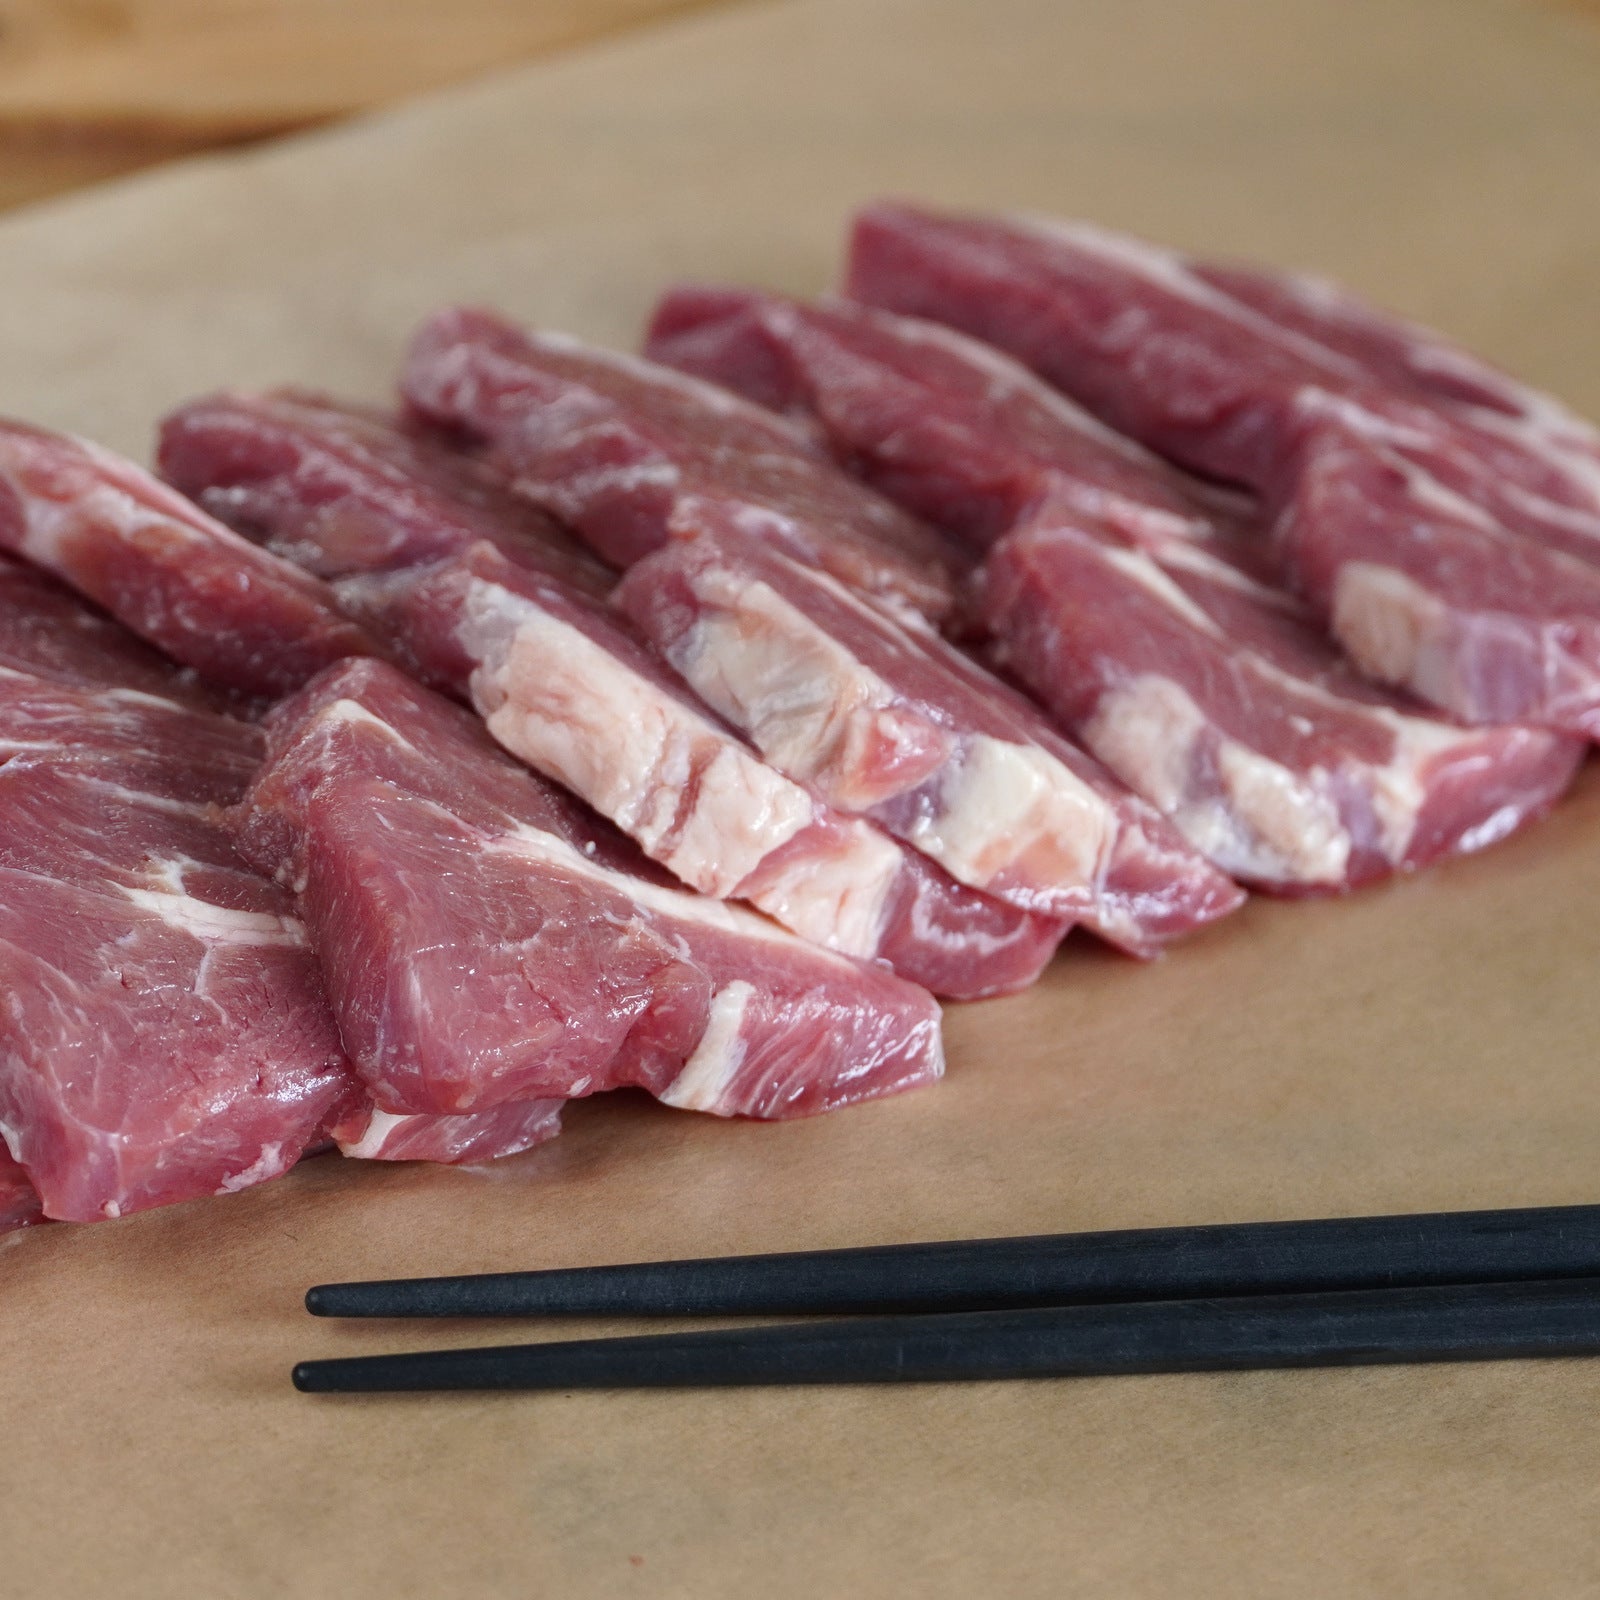 Free-Range Lamb Shoulder Thick BBQ Slices from New Zealand (300g) - Horizon Farms